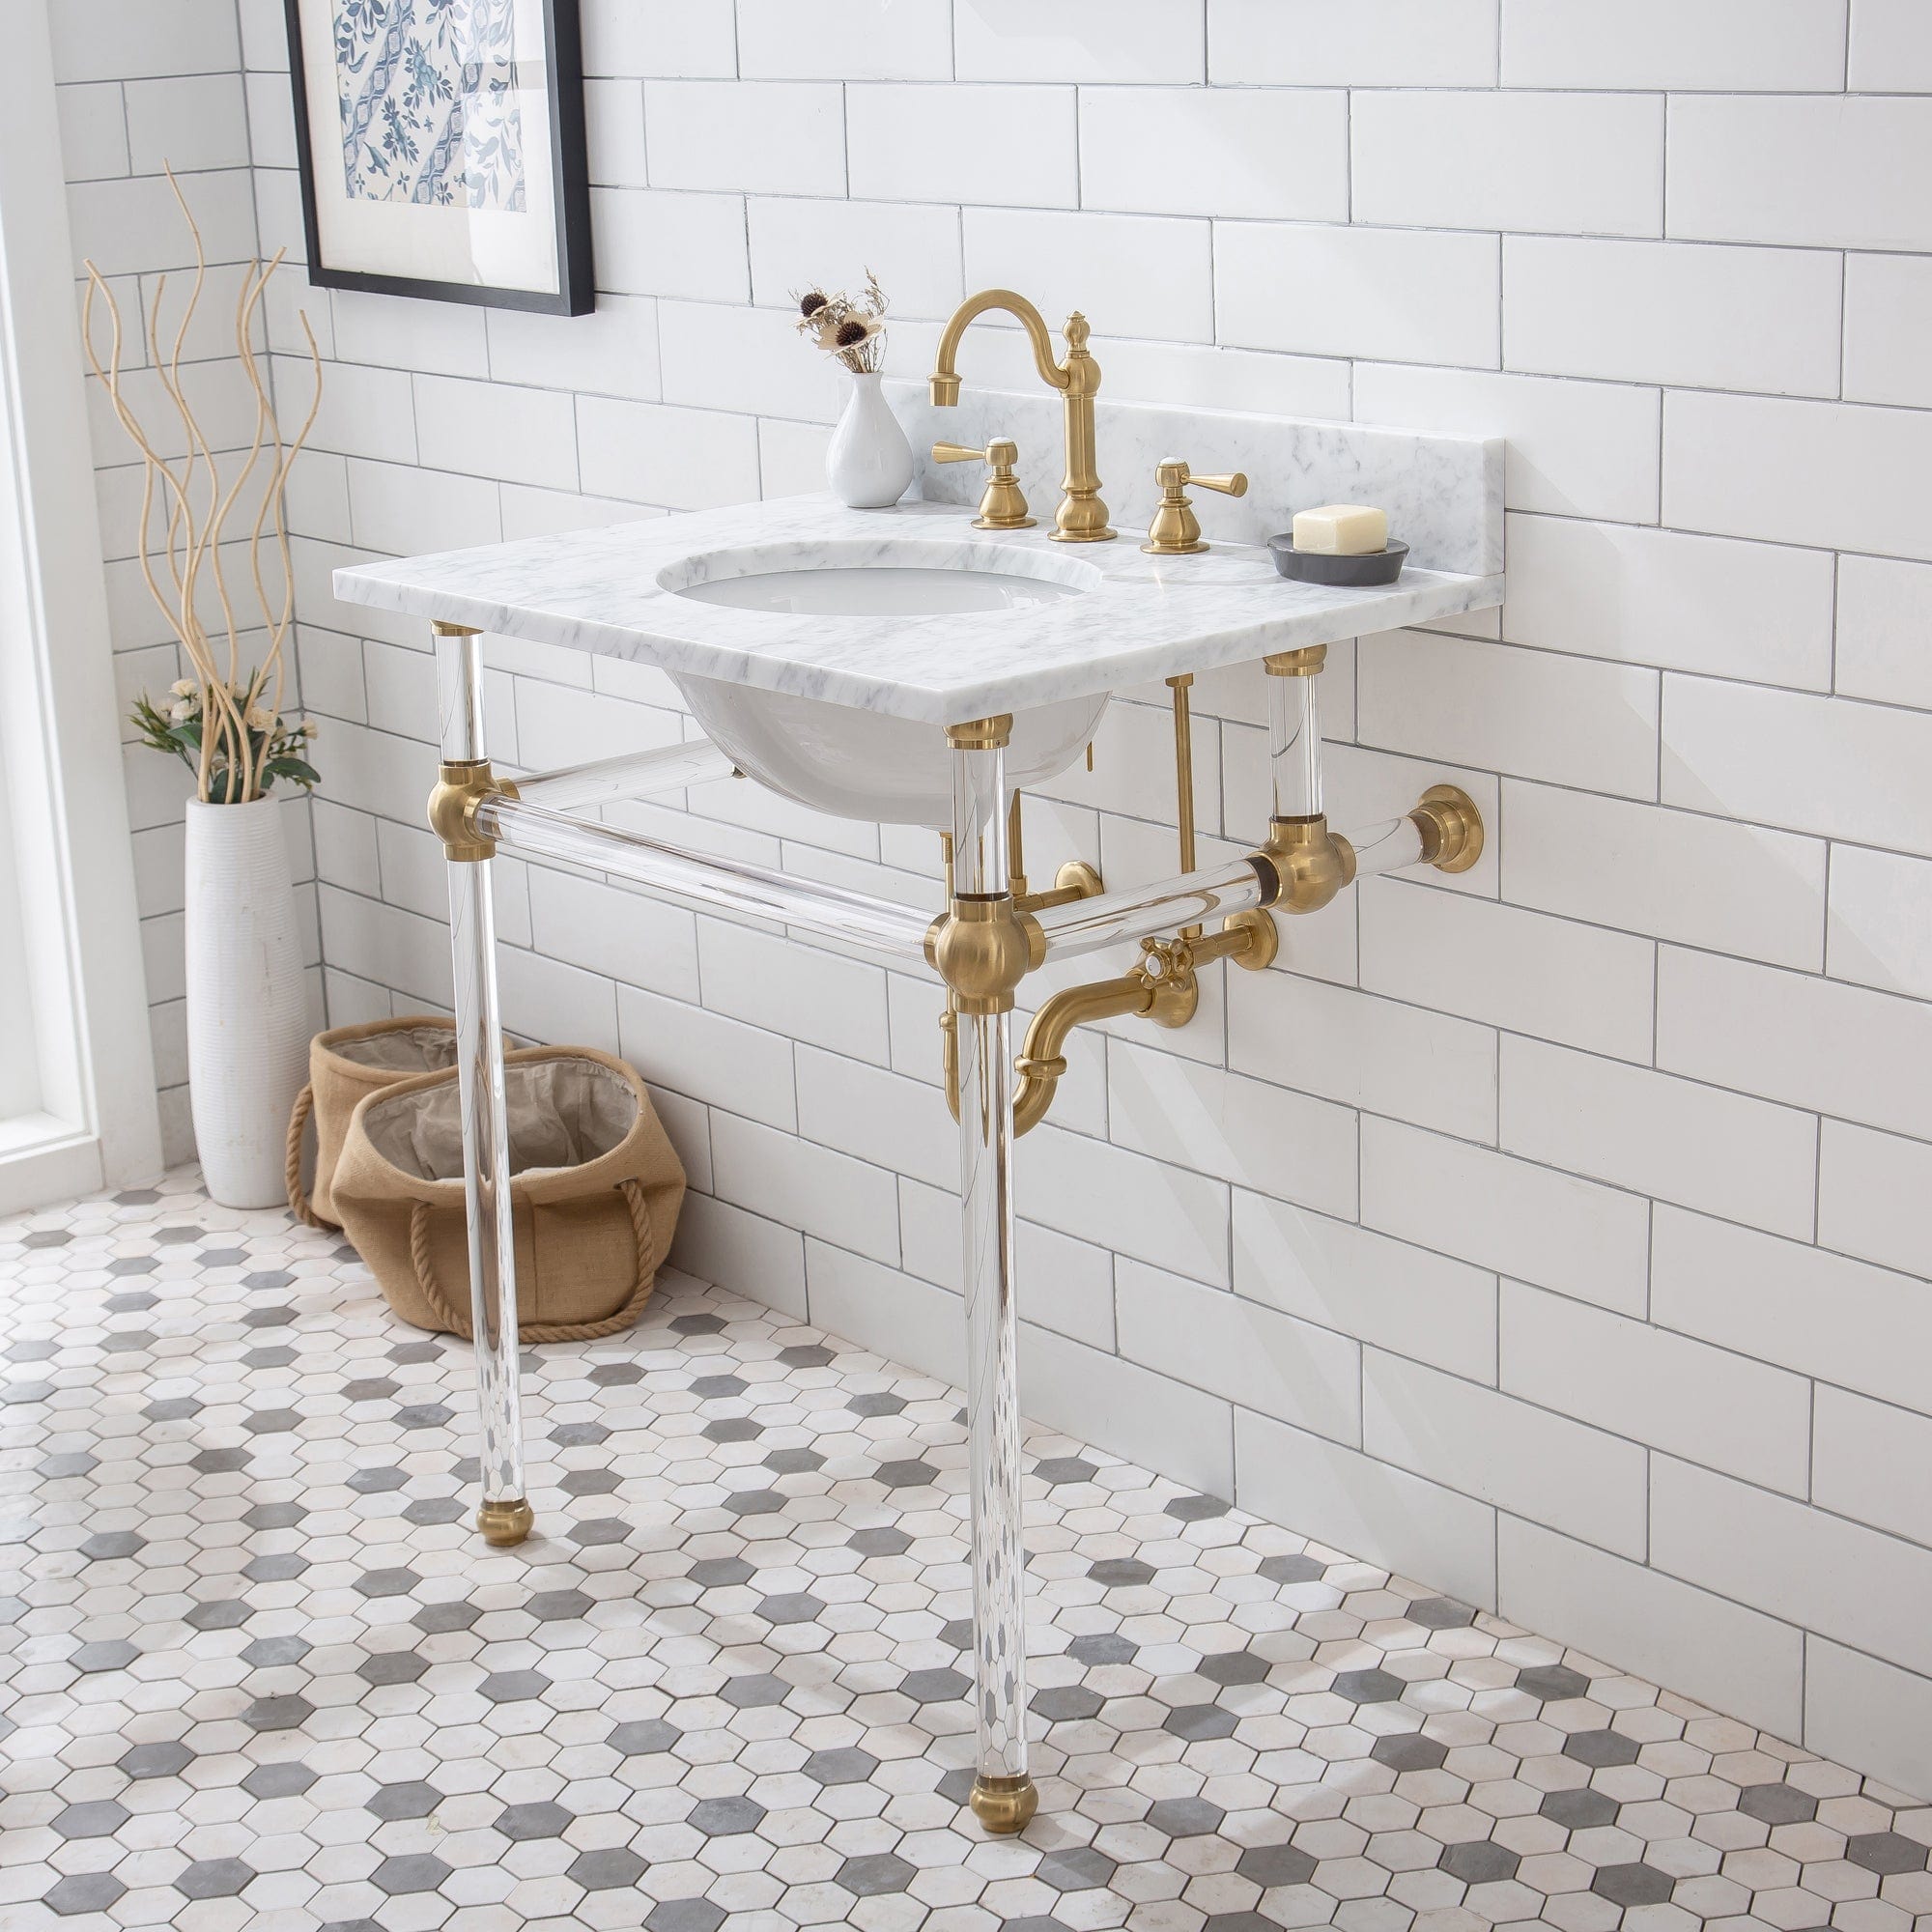 Empire 30 Inch Wide Single Wash Stand, P-Trap, Counter Top with Basin, F2-0012 Faucet and Mirror included in Satin Gold Finish - Molaix732030762725EP30E-0612